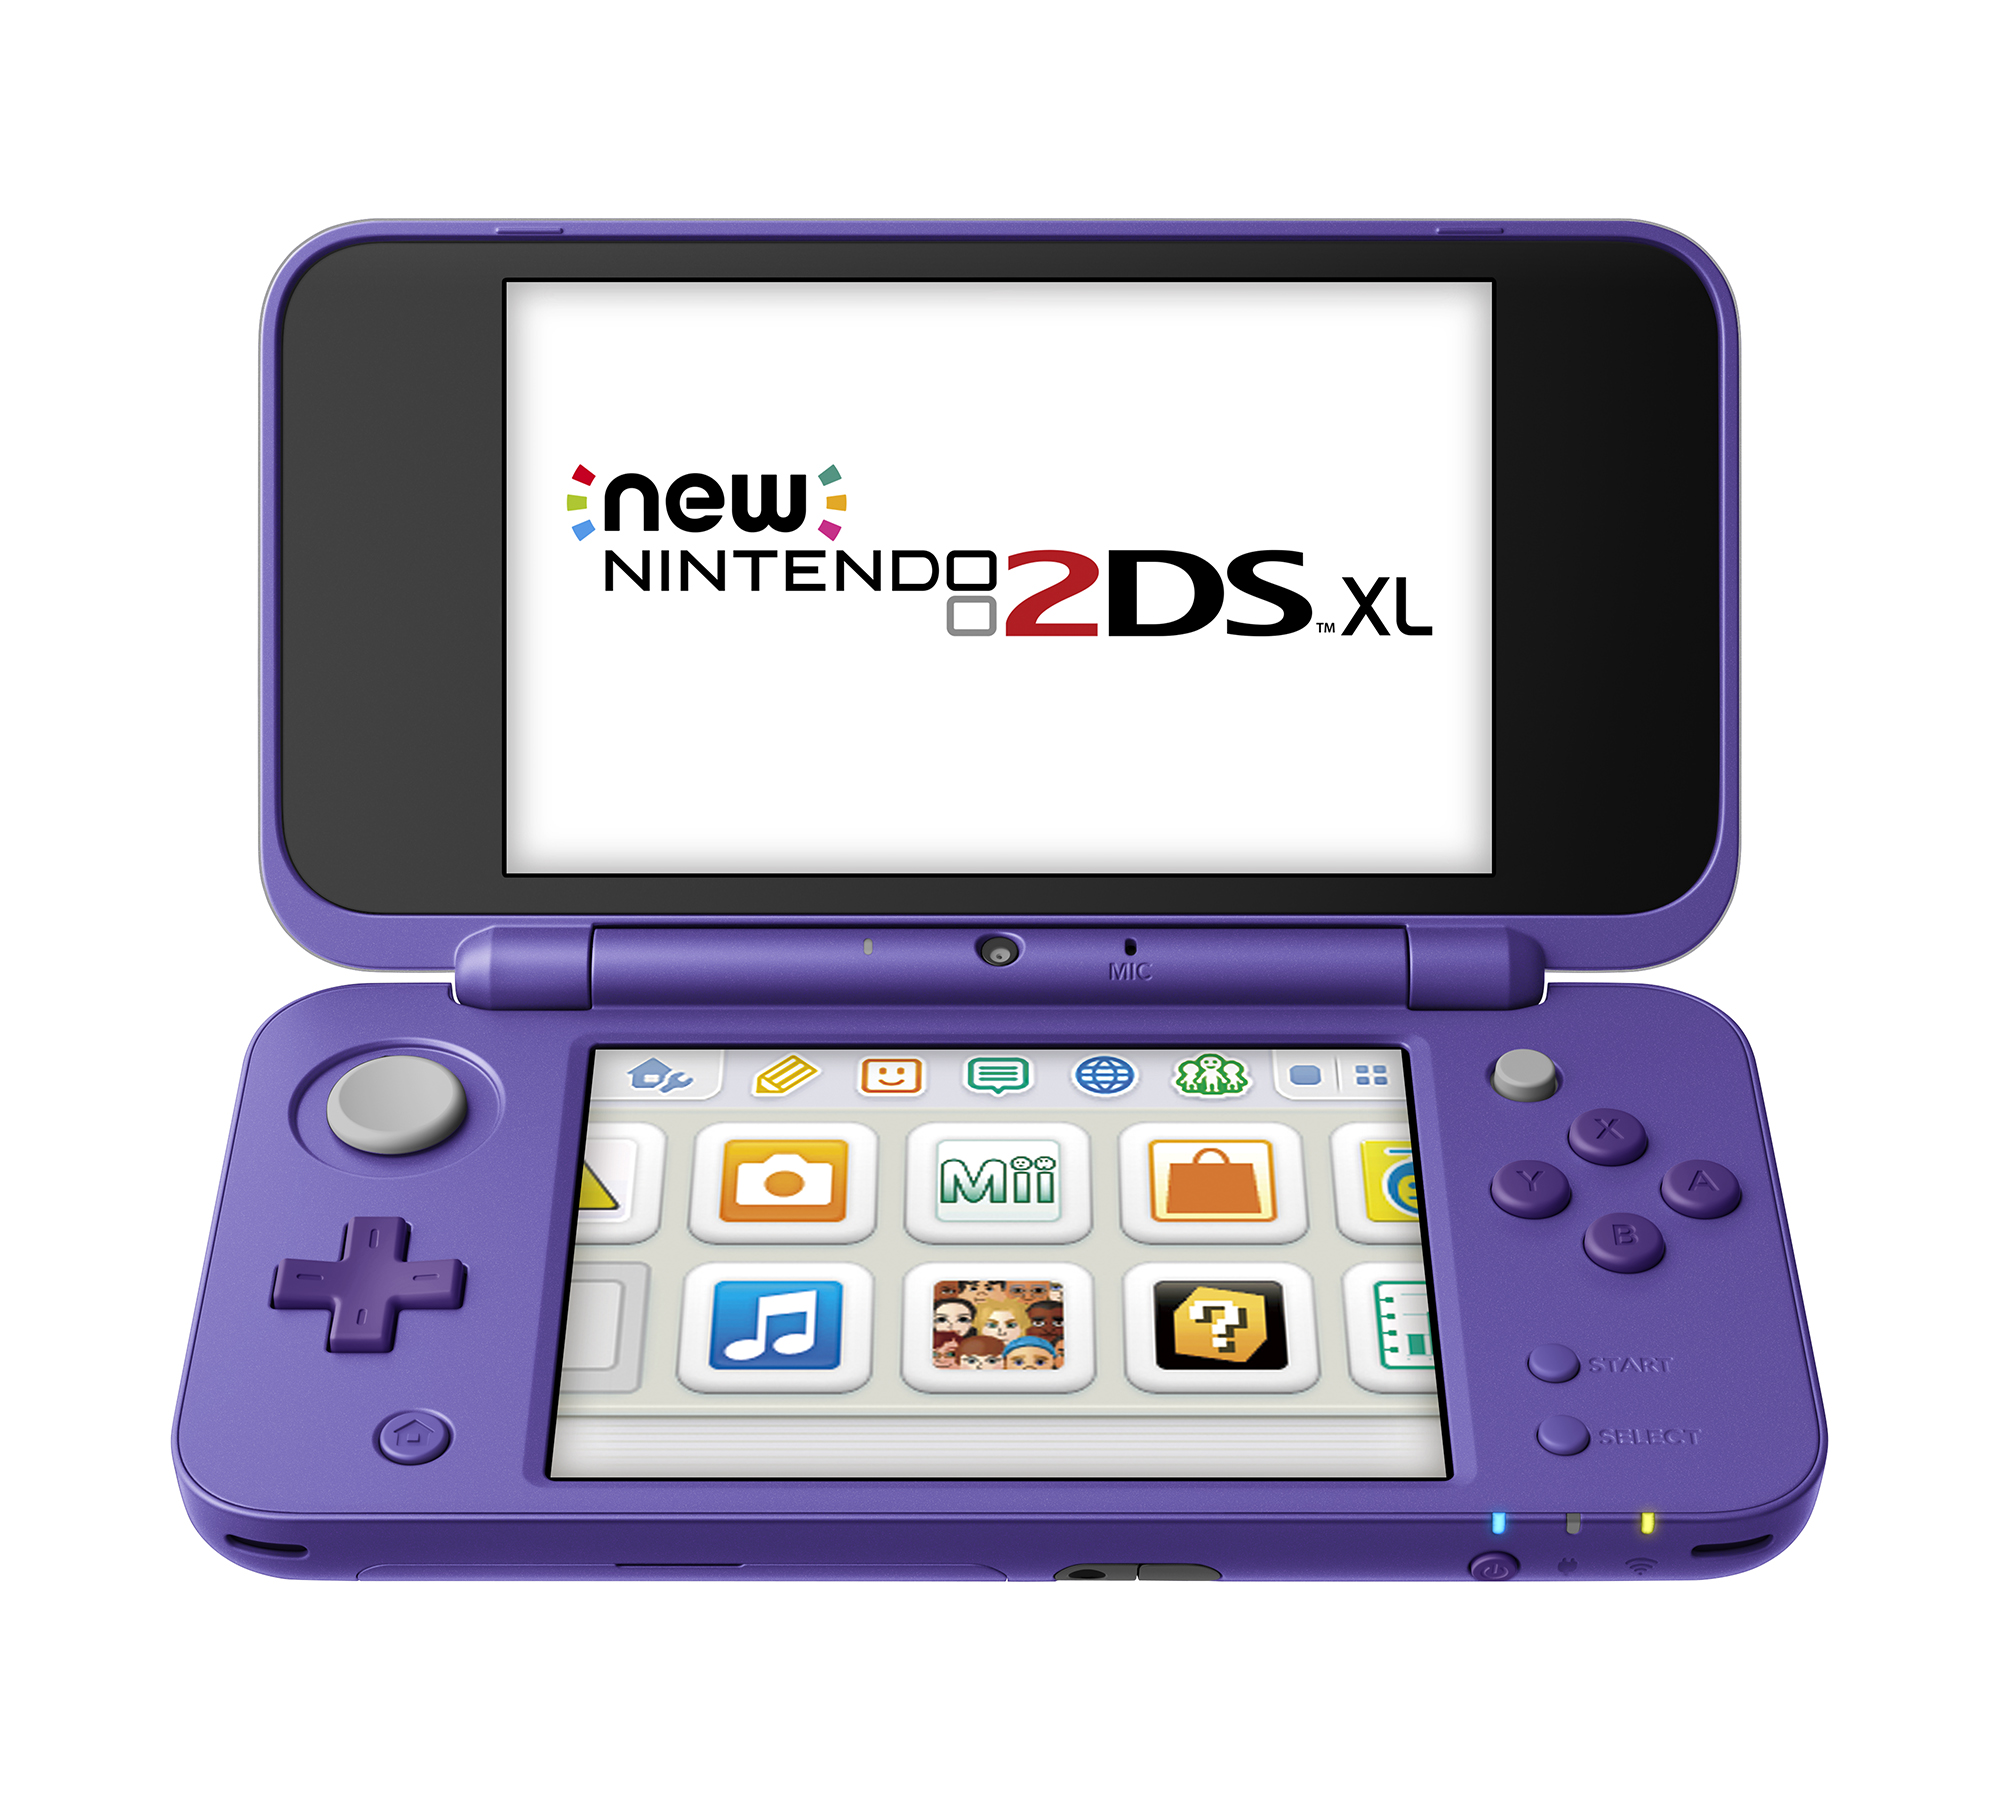 Get A New Nintendo 2ds Xl For 129 The Best Price We Ve Seen For Black Friday Gamesradar